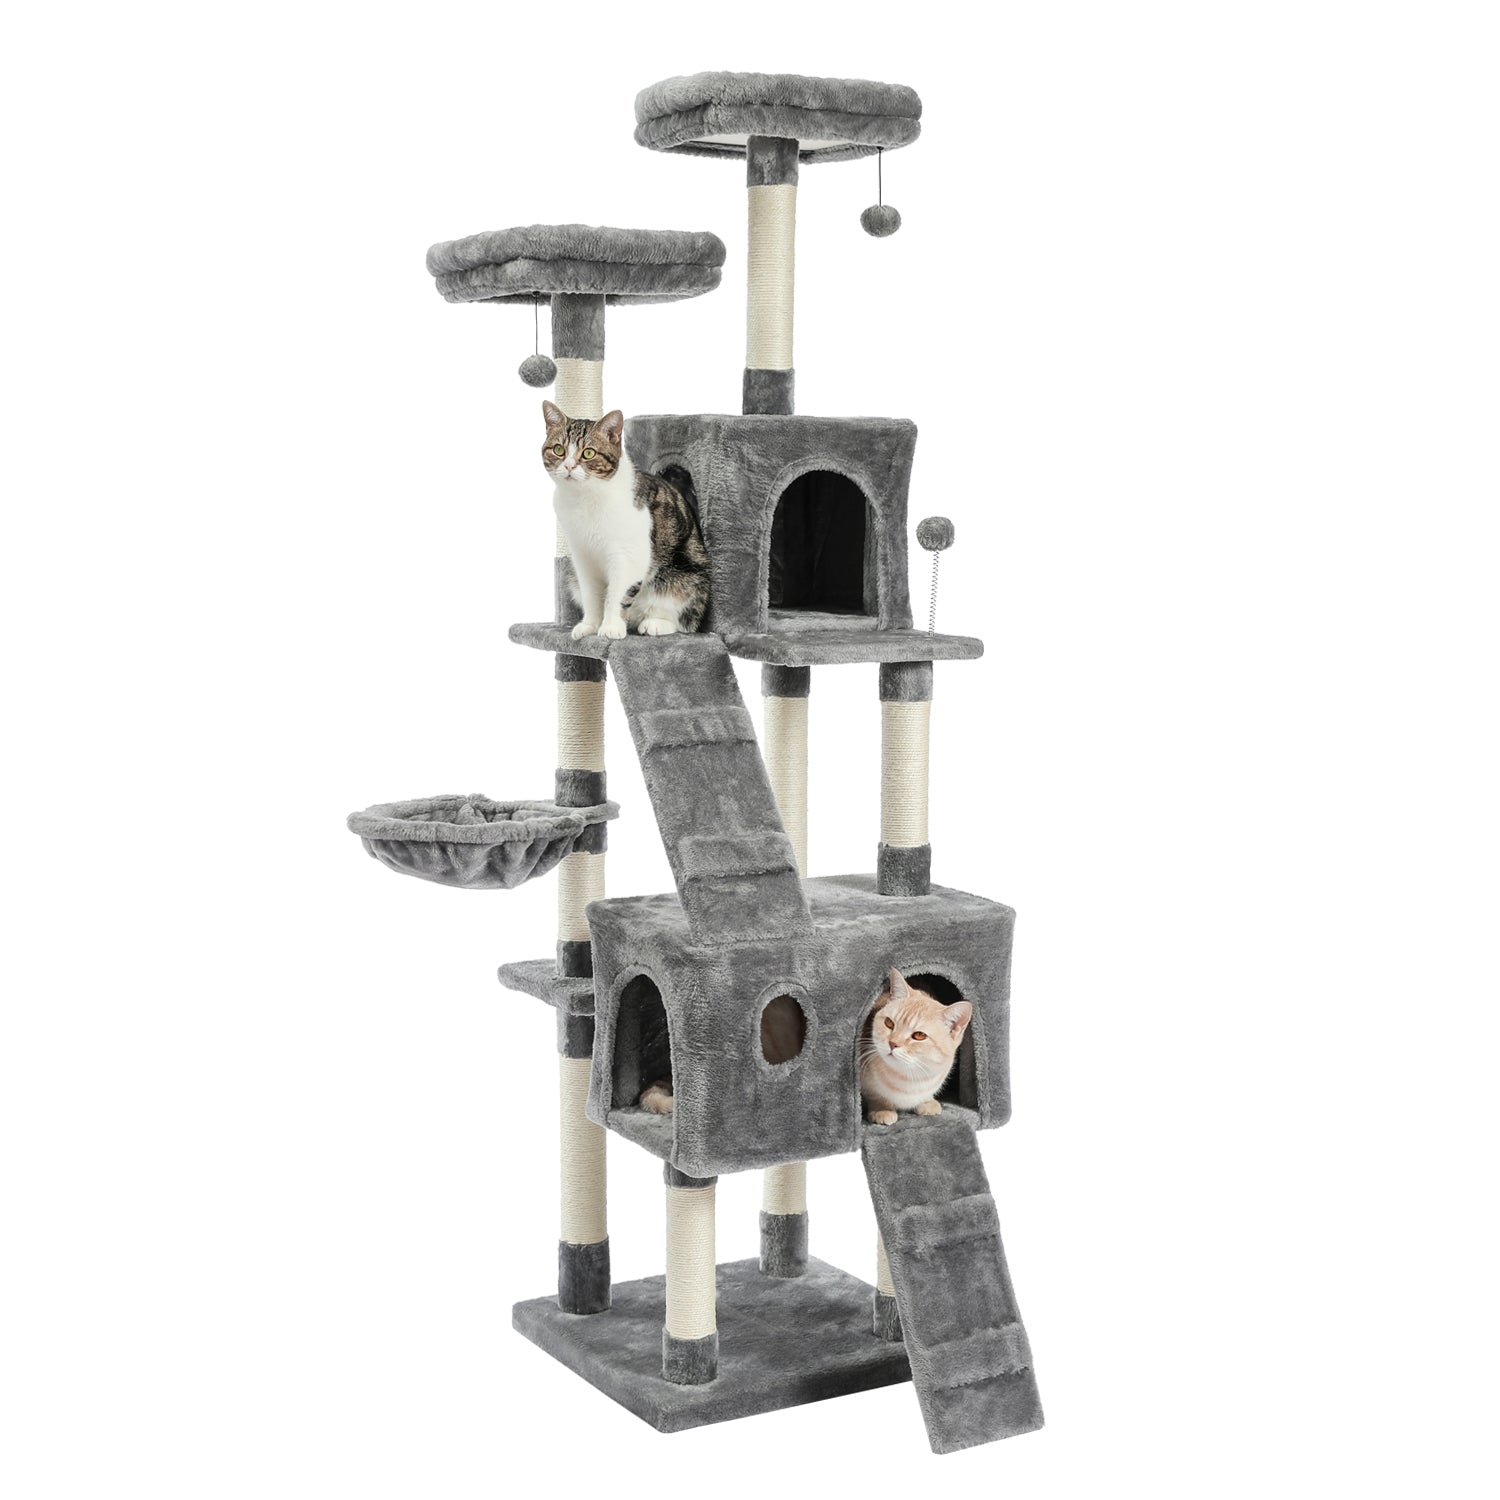 Cat Tree With Scratching Posts Natural Sisals,Kitten Play House With 2 Condos Spacious Perches Cat Climbing Tower Furniture - TOYSHIP